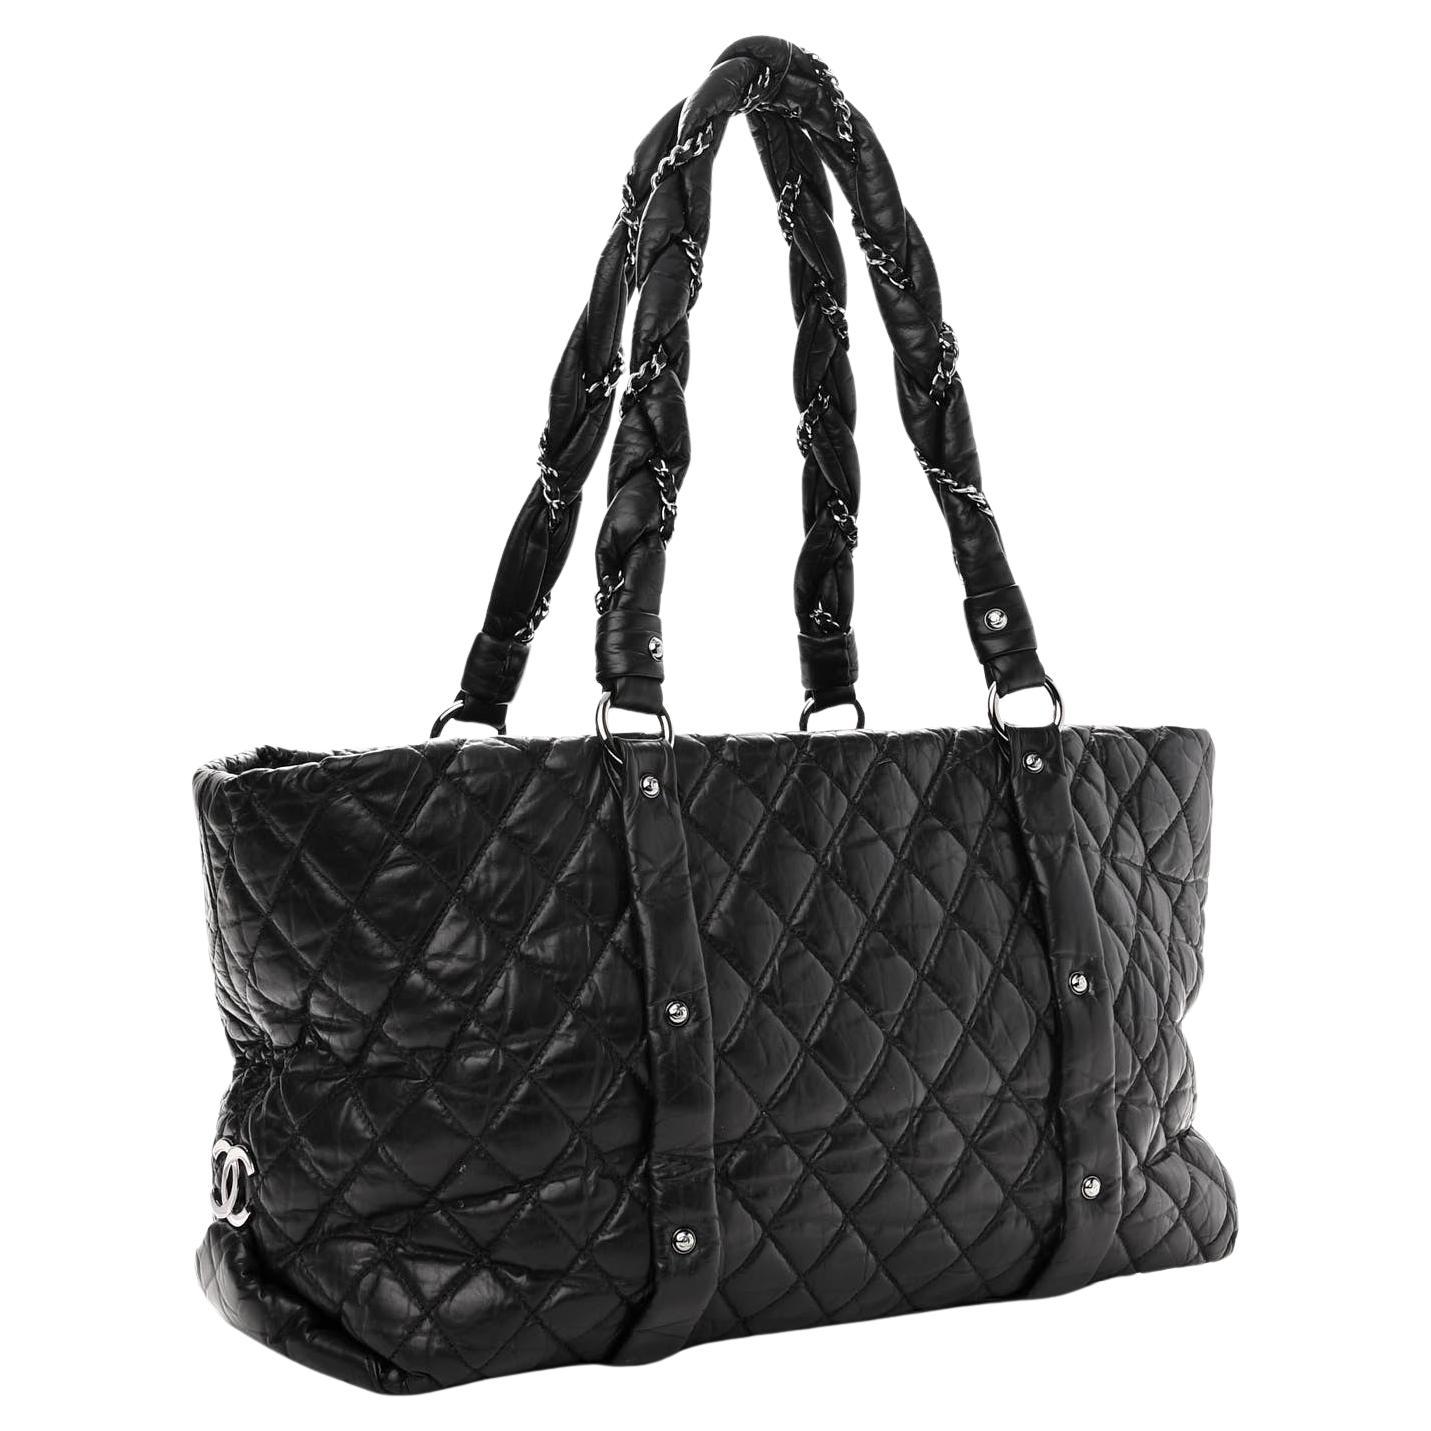 Chanel 2006 Soft Plush Quilted Distressed Leather Large Carry-On Travel Tote Bag For Sale 3